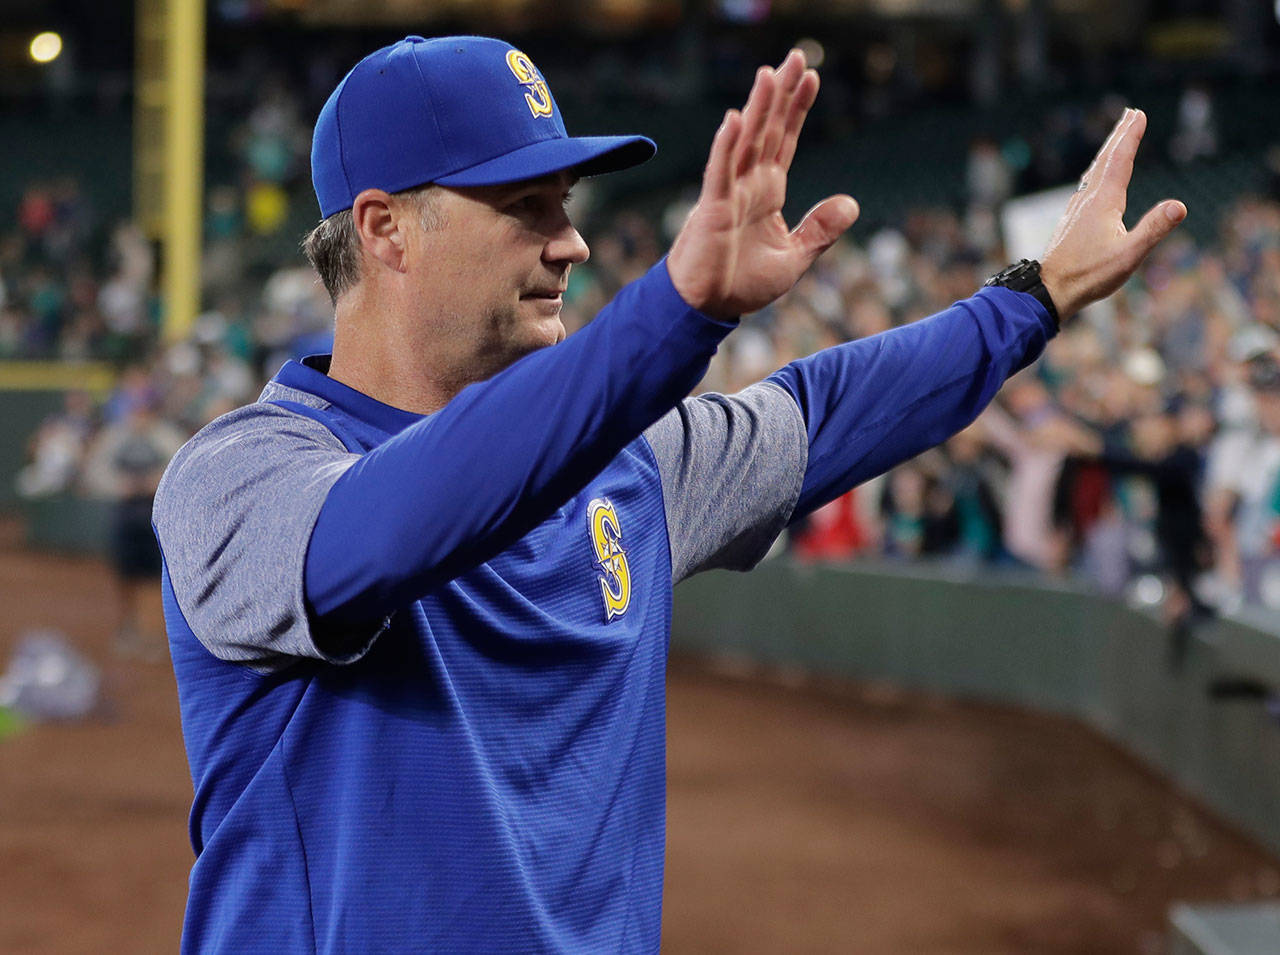 Mariners manager Scott Servais waves to fans after a game against the Rangers on Sept. 30, 2018, in Seattle. (AP Photo/Ted S. Warren)